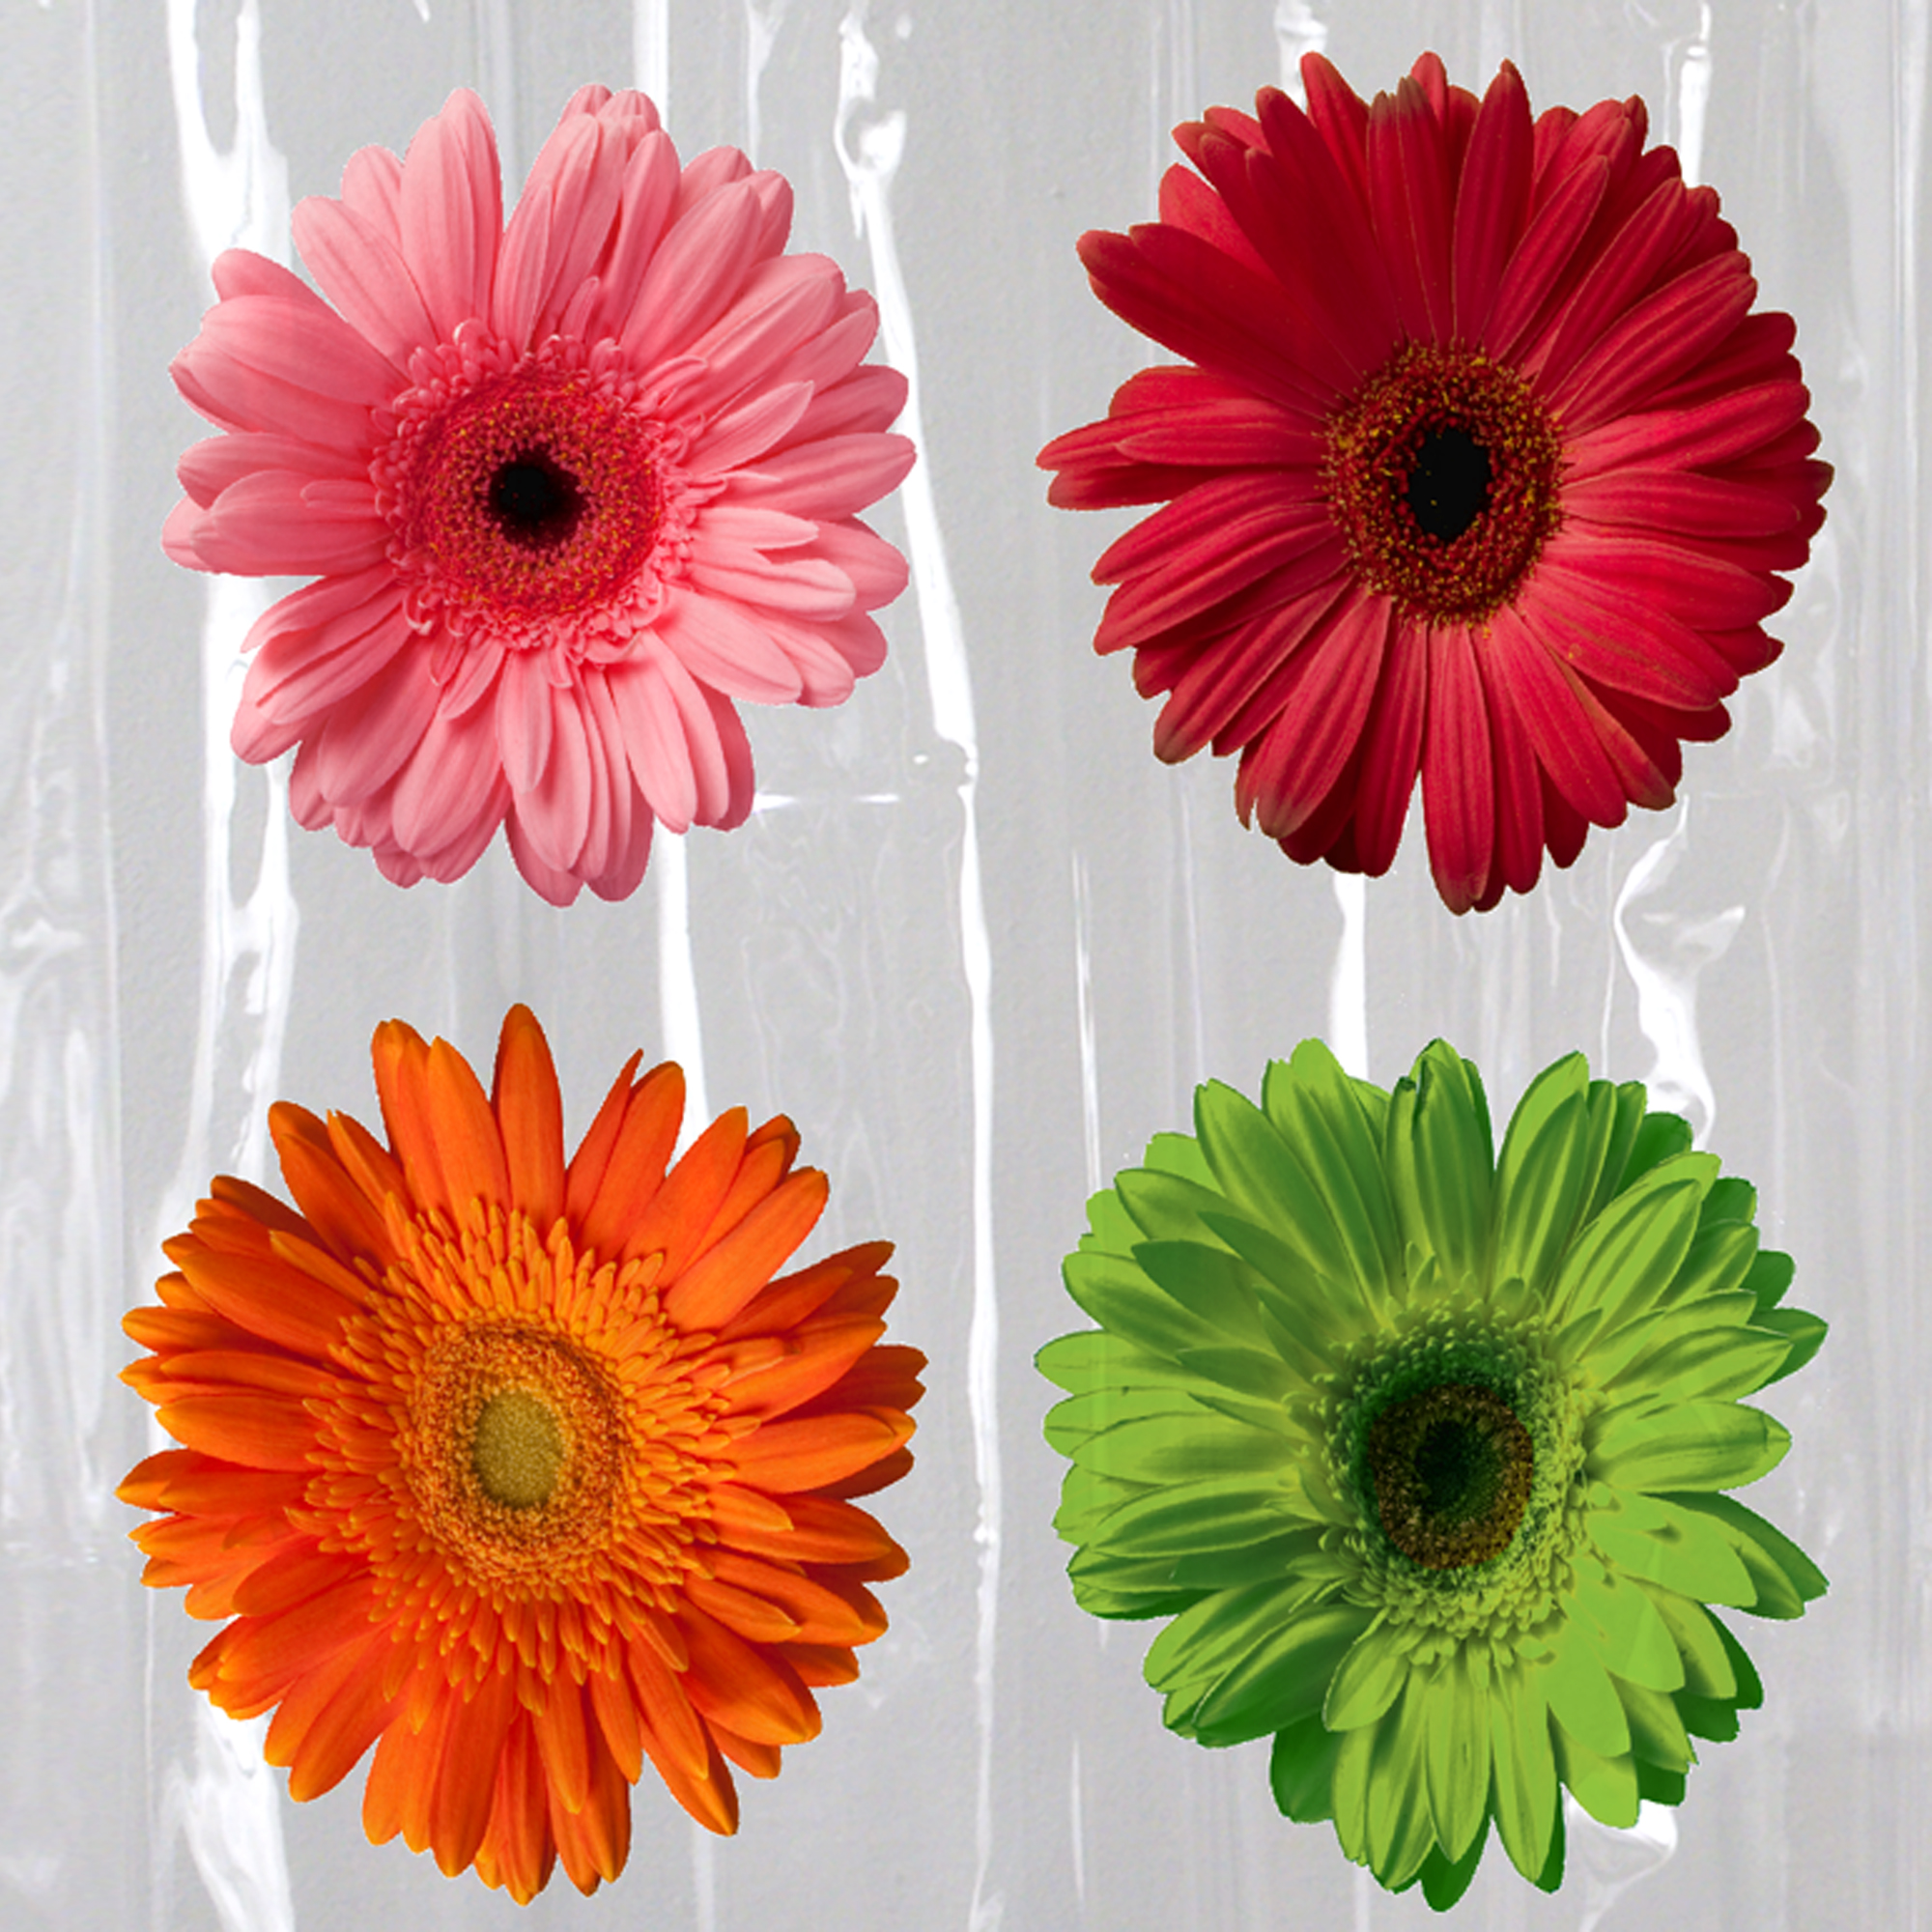 Gerber Daisy PEVA Shower Curtain, Floral - image 2 of 5